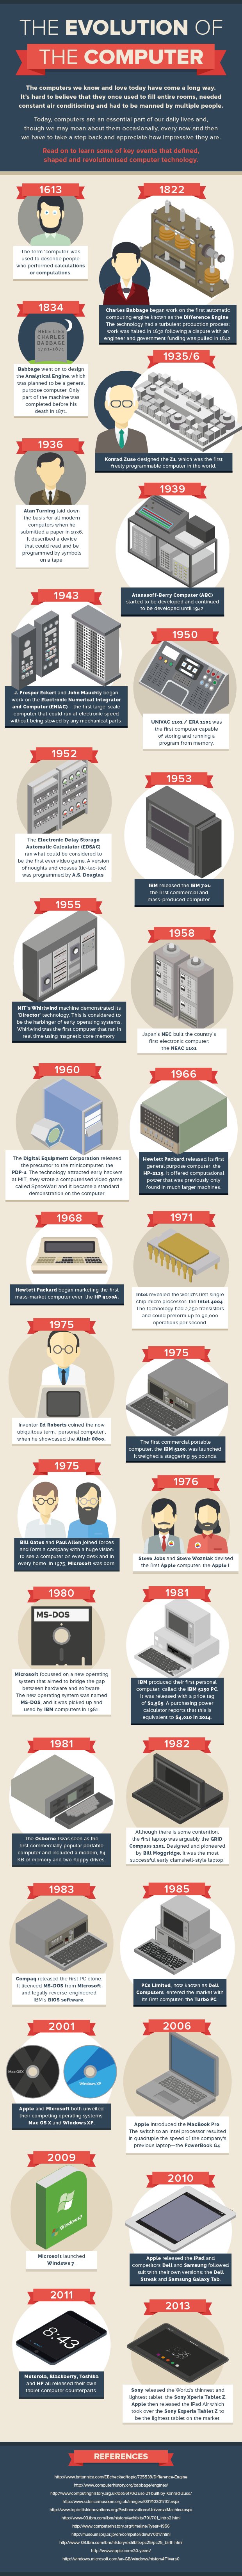 The Evolution of the Computer by ebuyer.com